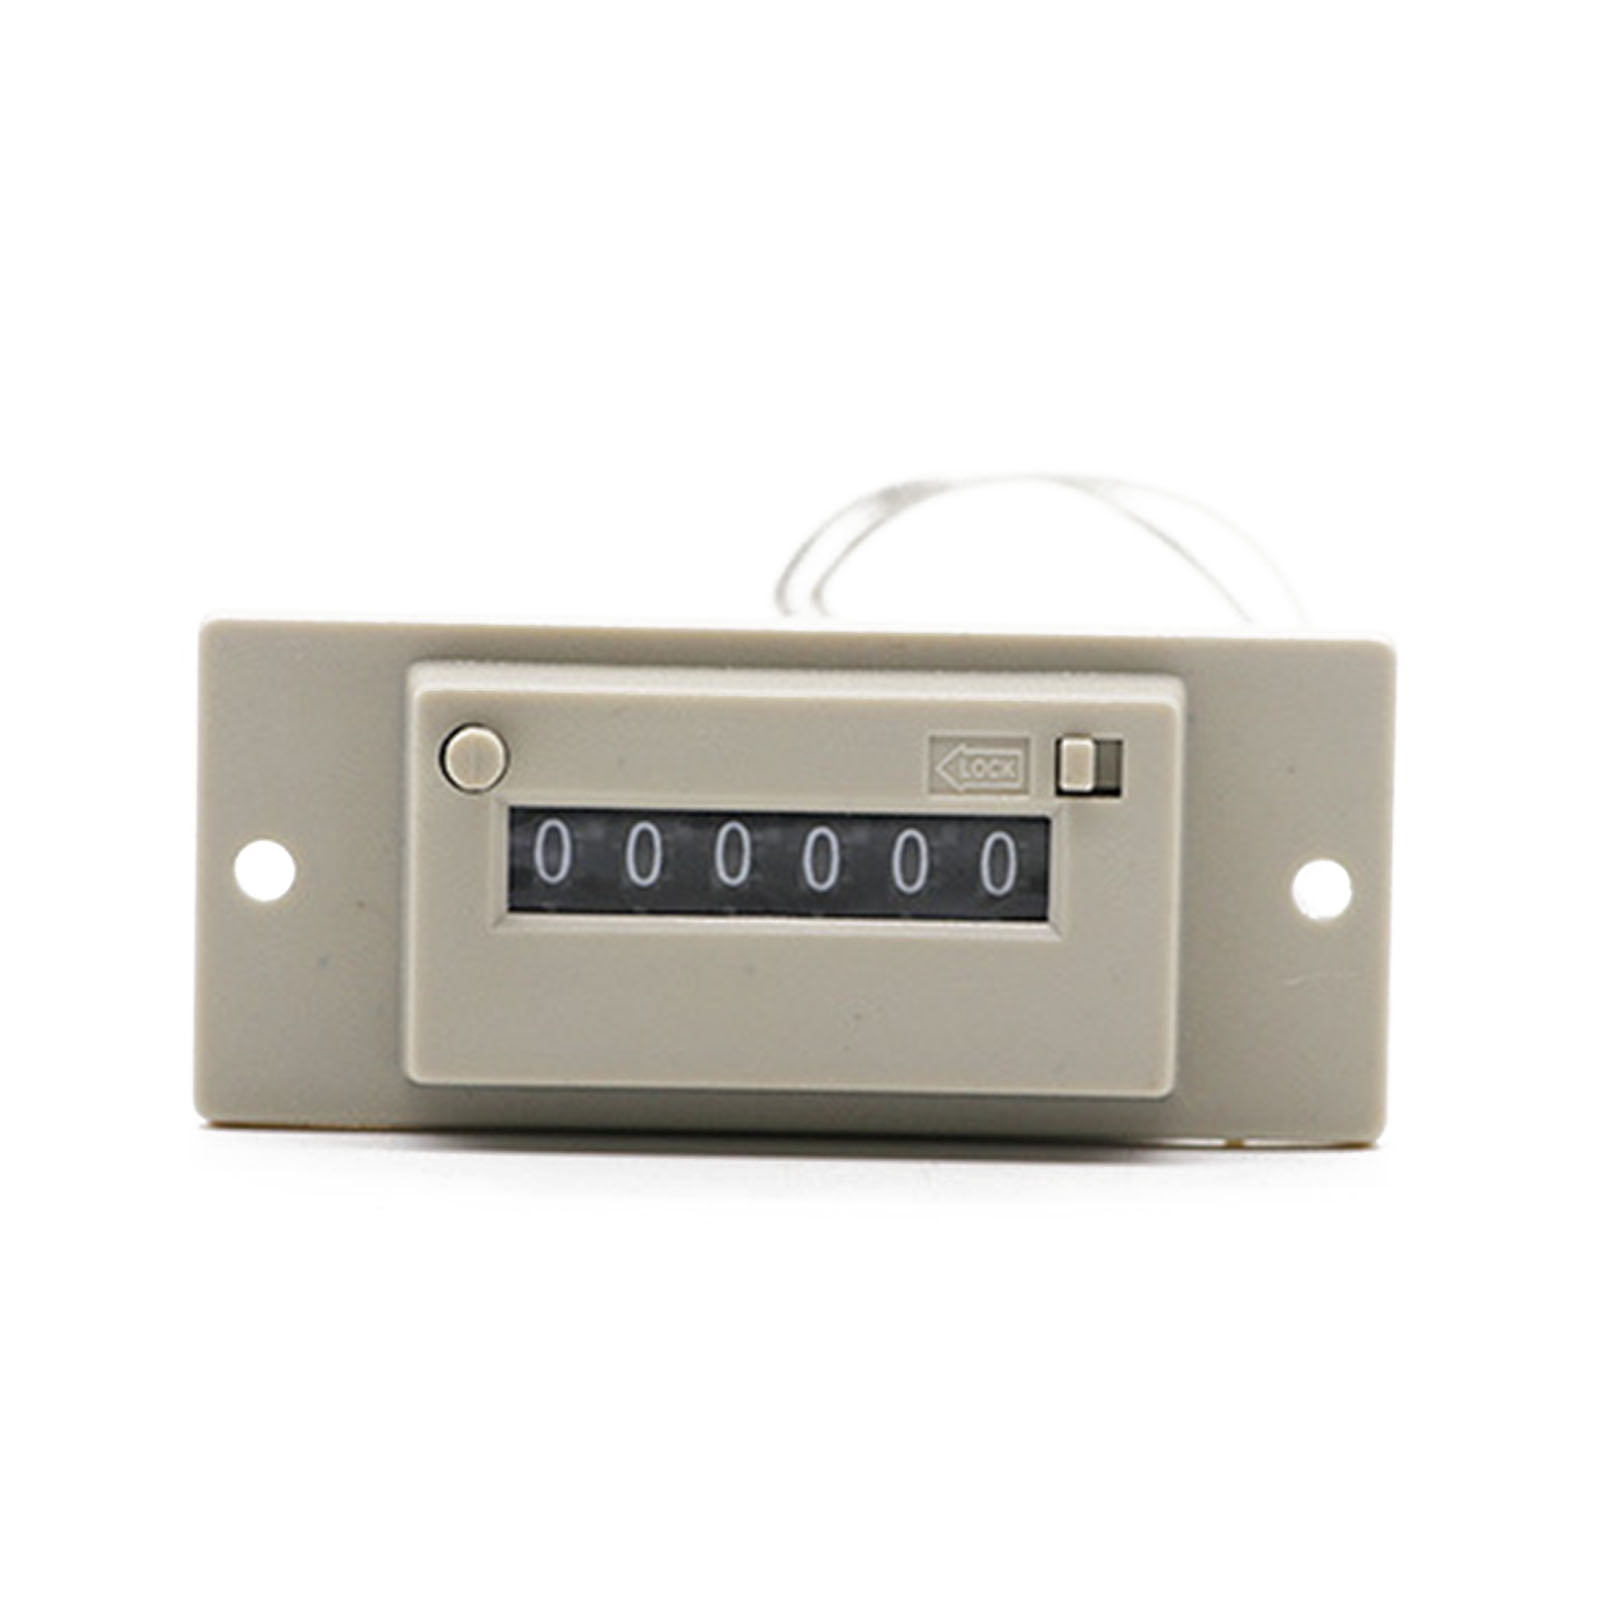 New CSK6-CKW AC220V 6 Digits 2 Wire Lockable Electronmagnetic Counter 